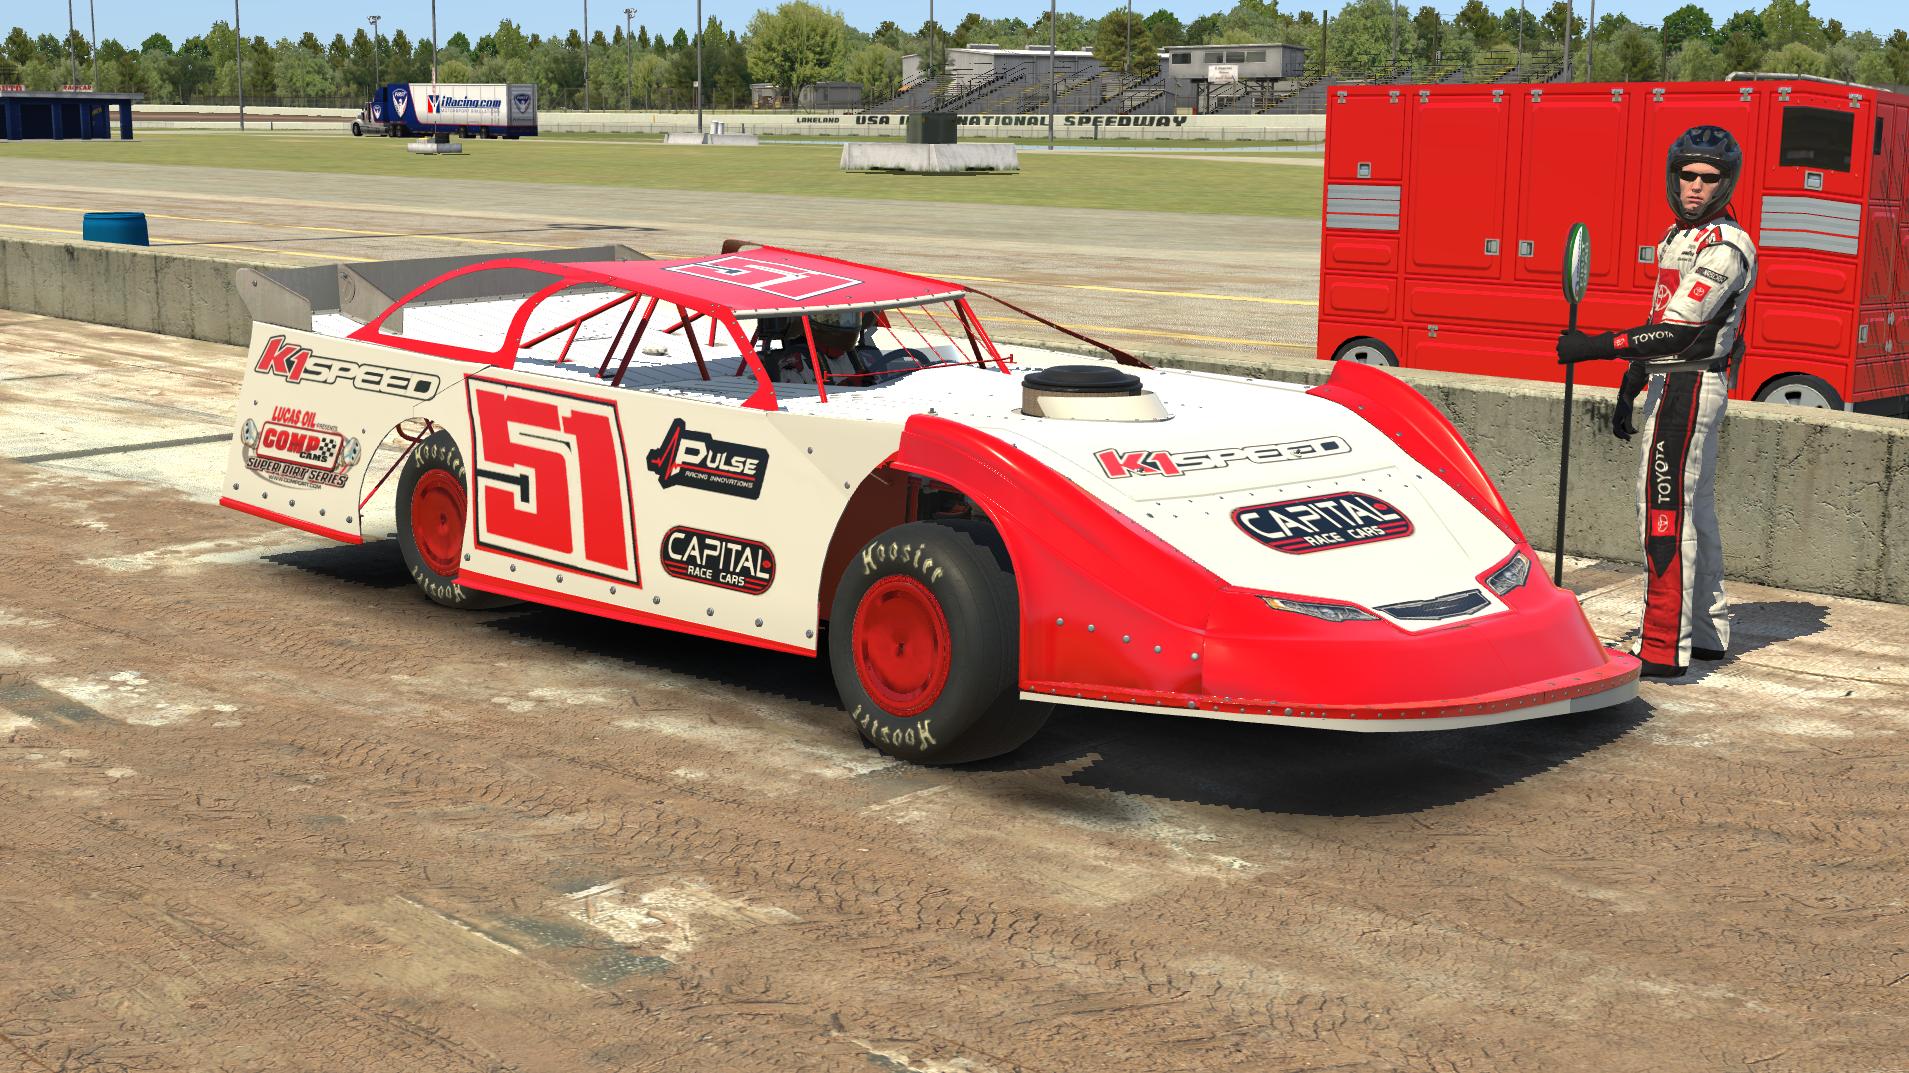 K1 Speed 51 - Dirt Late Model by Nick Lent - Trading Paints